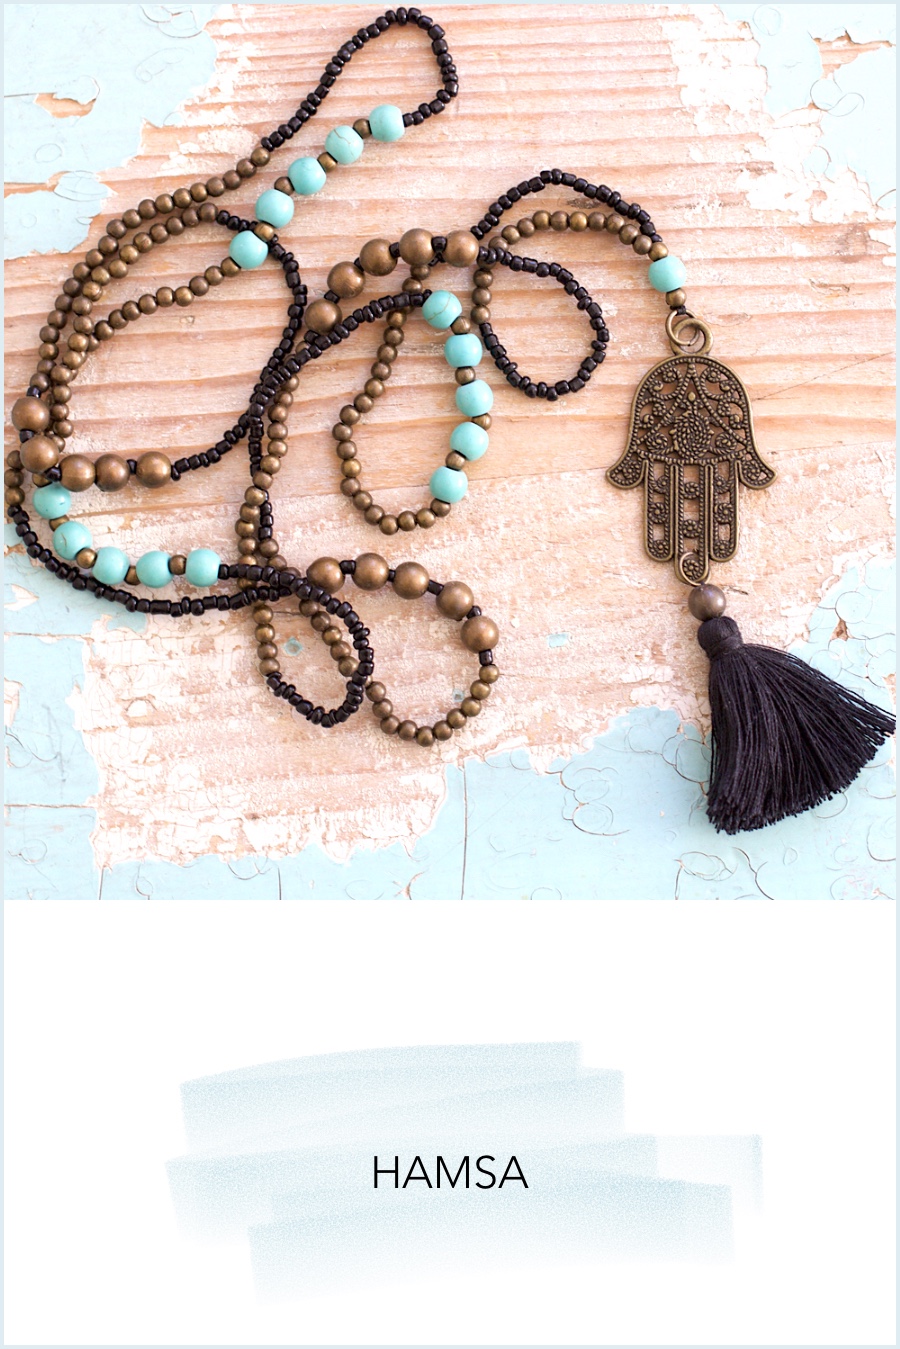 Beautiful handcrafted designer jewelry from Bali Indonesia. Handmade with love via @lynneknowlton